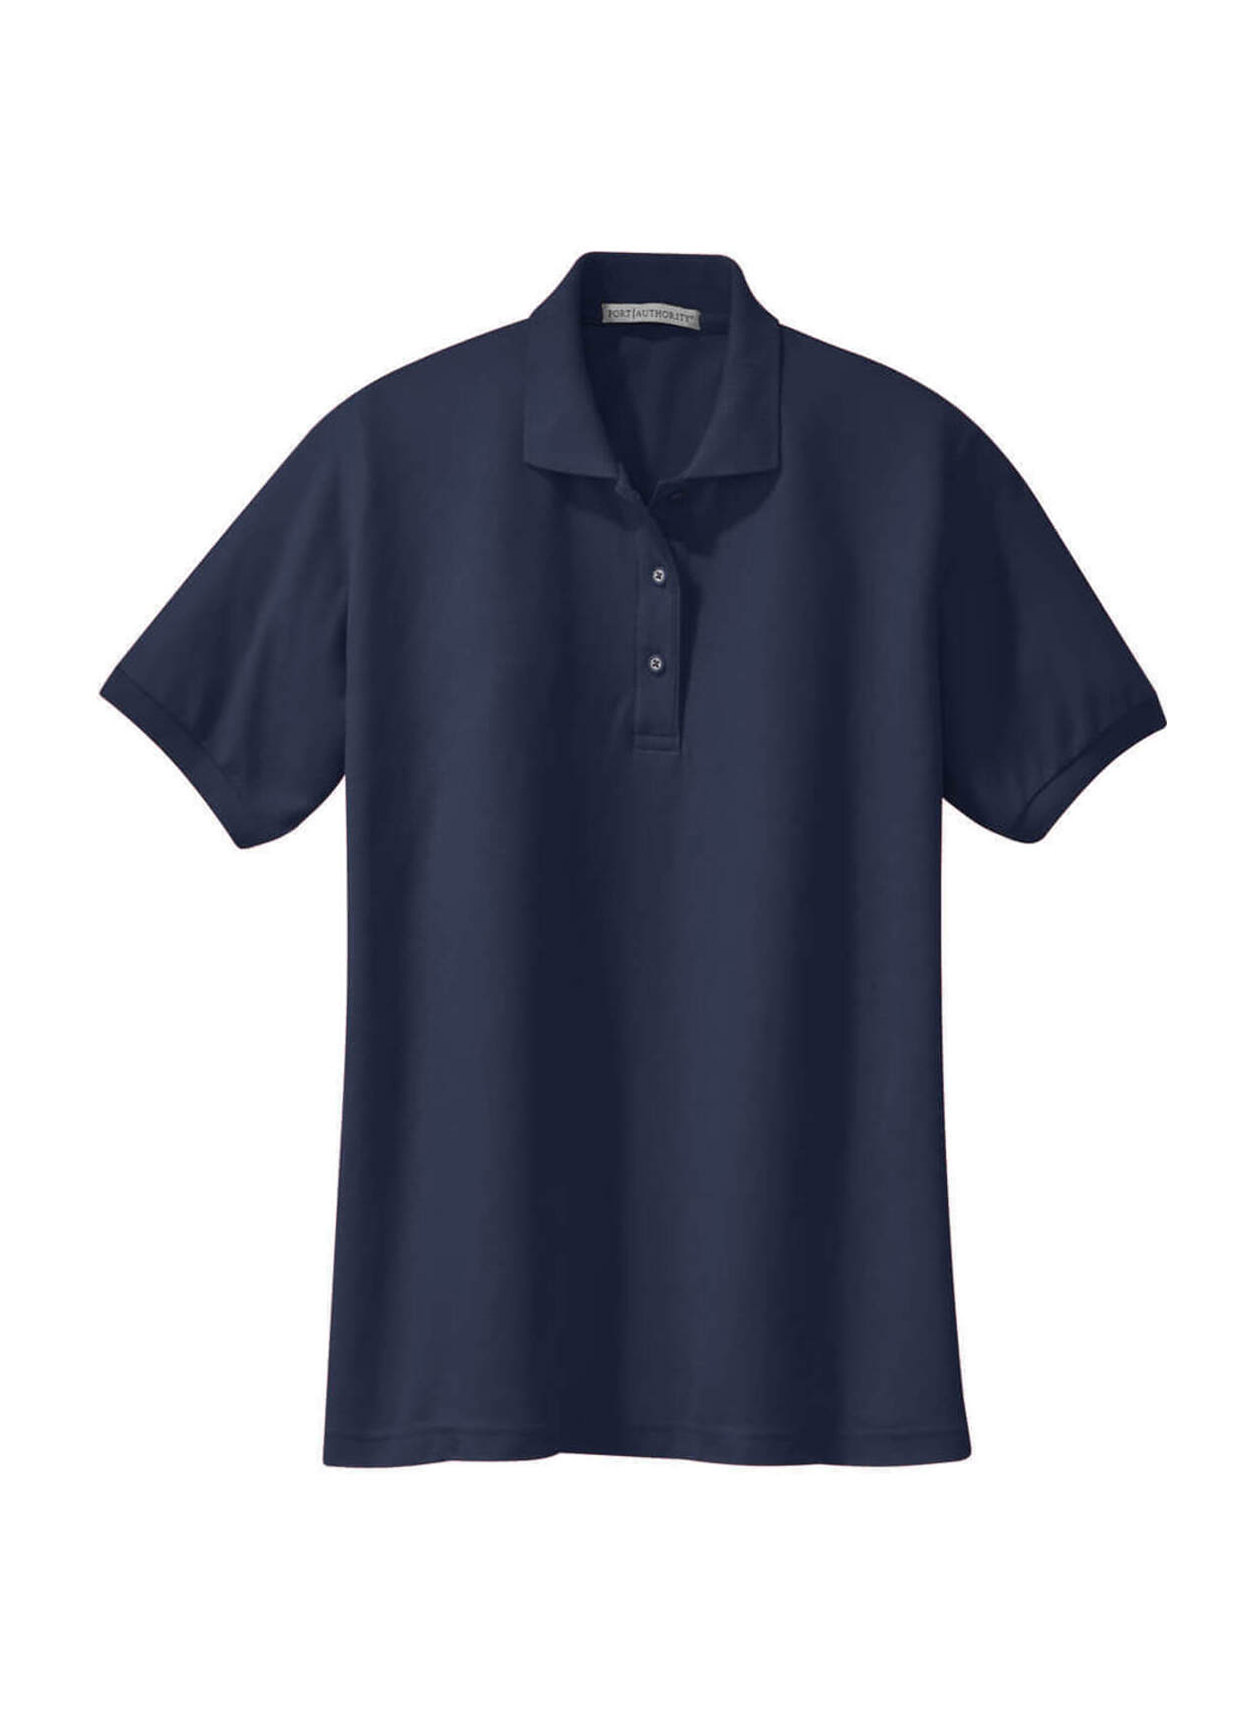 Port Authority Women's Navy Silk Touch Polo